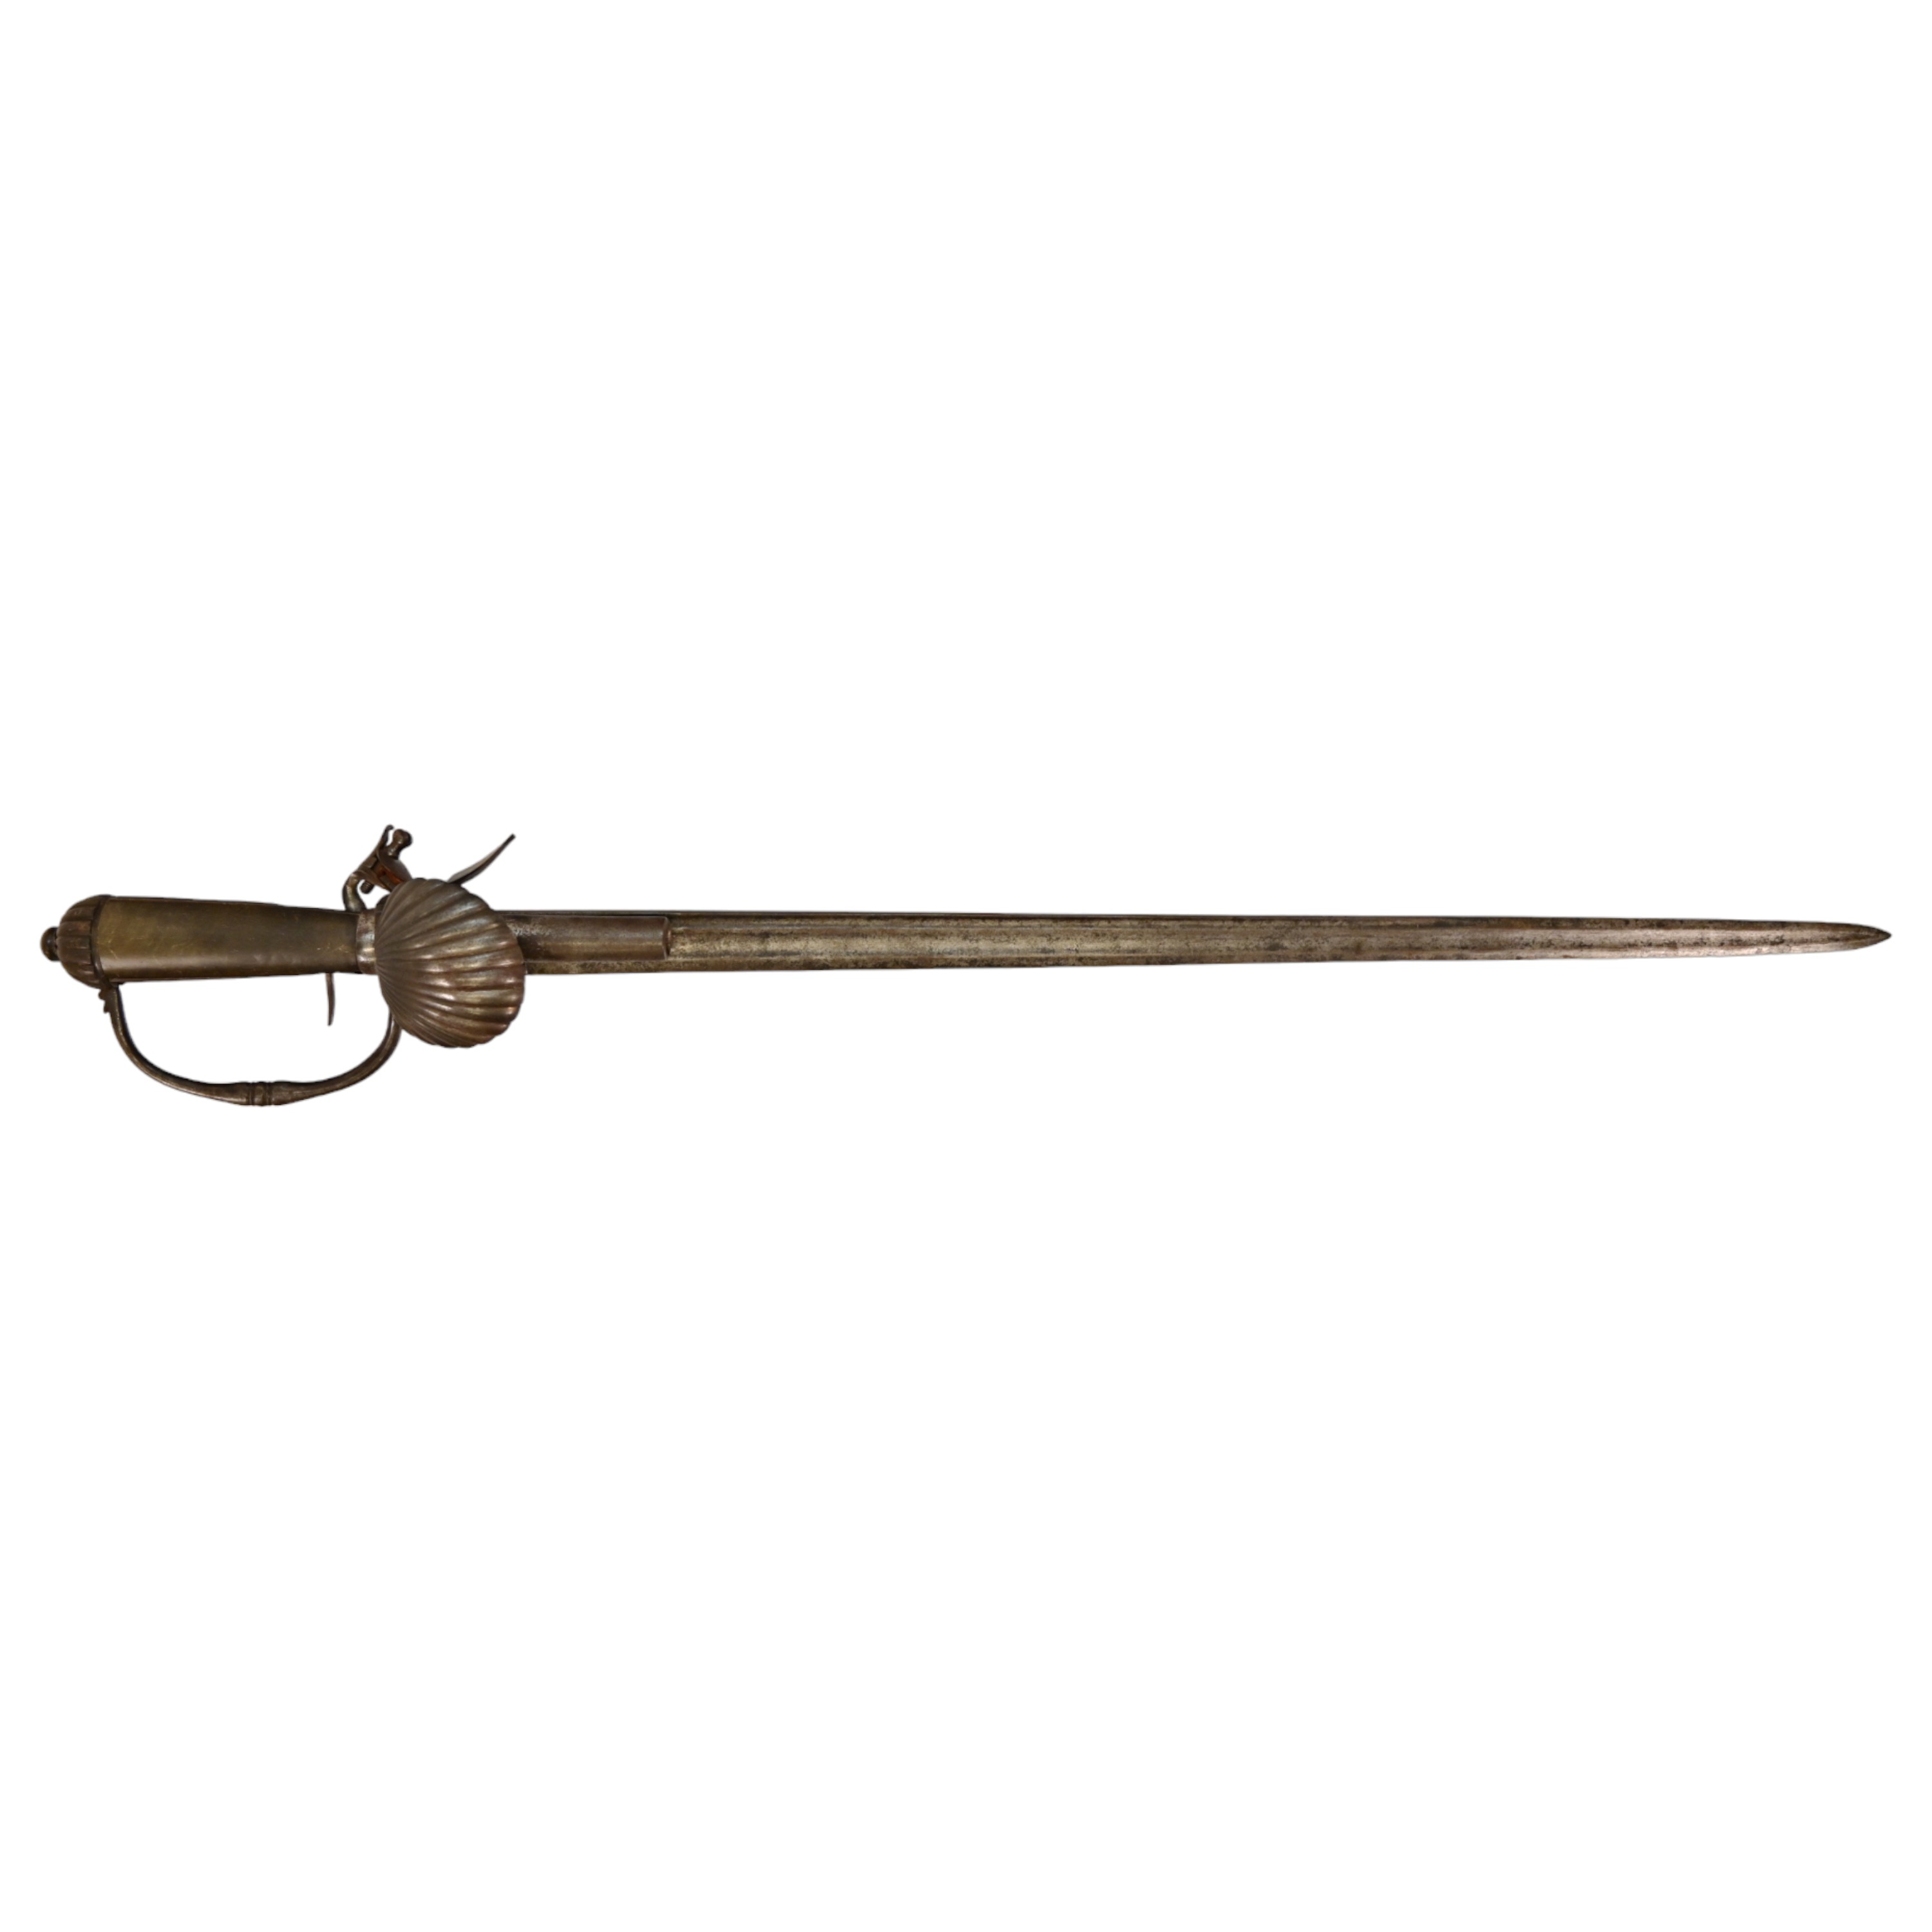 A FLINT LOCK HUNTING SWORD PISTOL WITH SHELL GUARD, IN THE ENGLISH TASTE, LAST HALF 18TH CENTURY. - Image 2 of 13